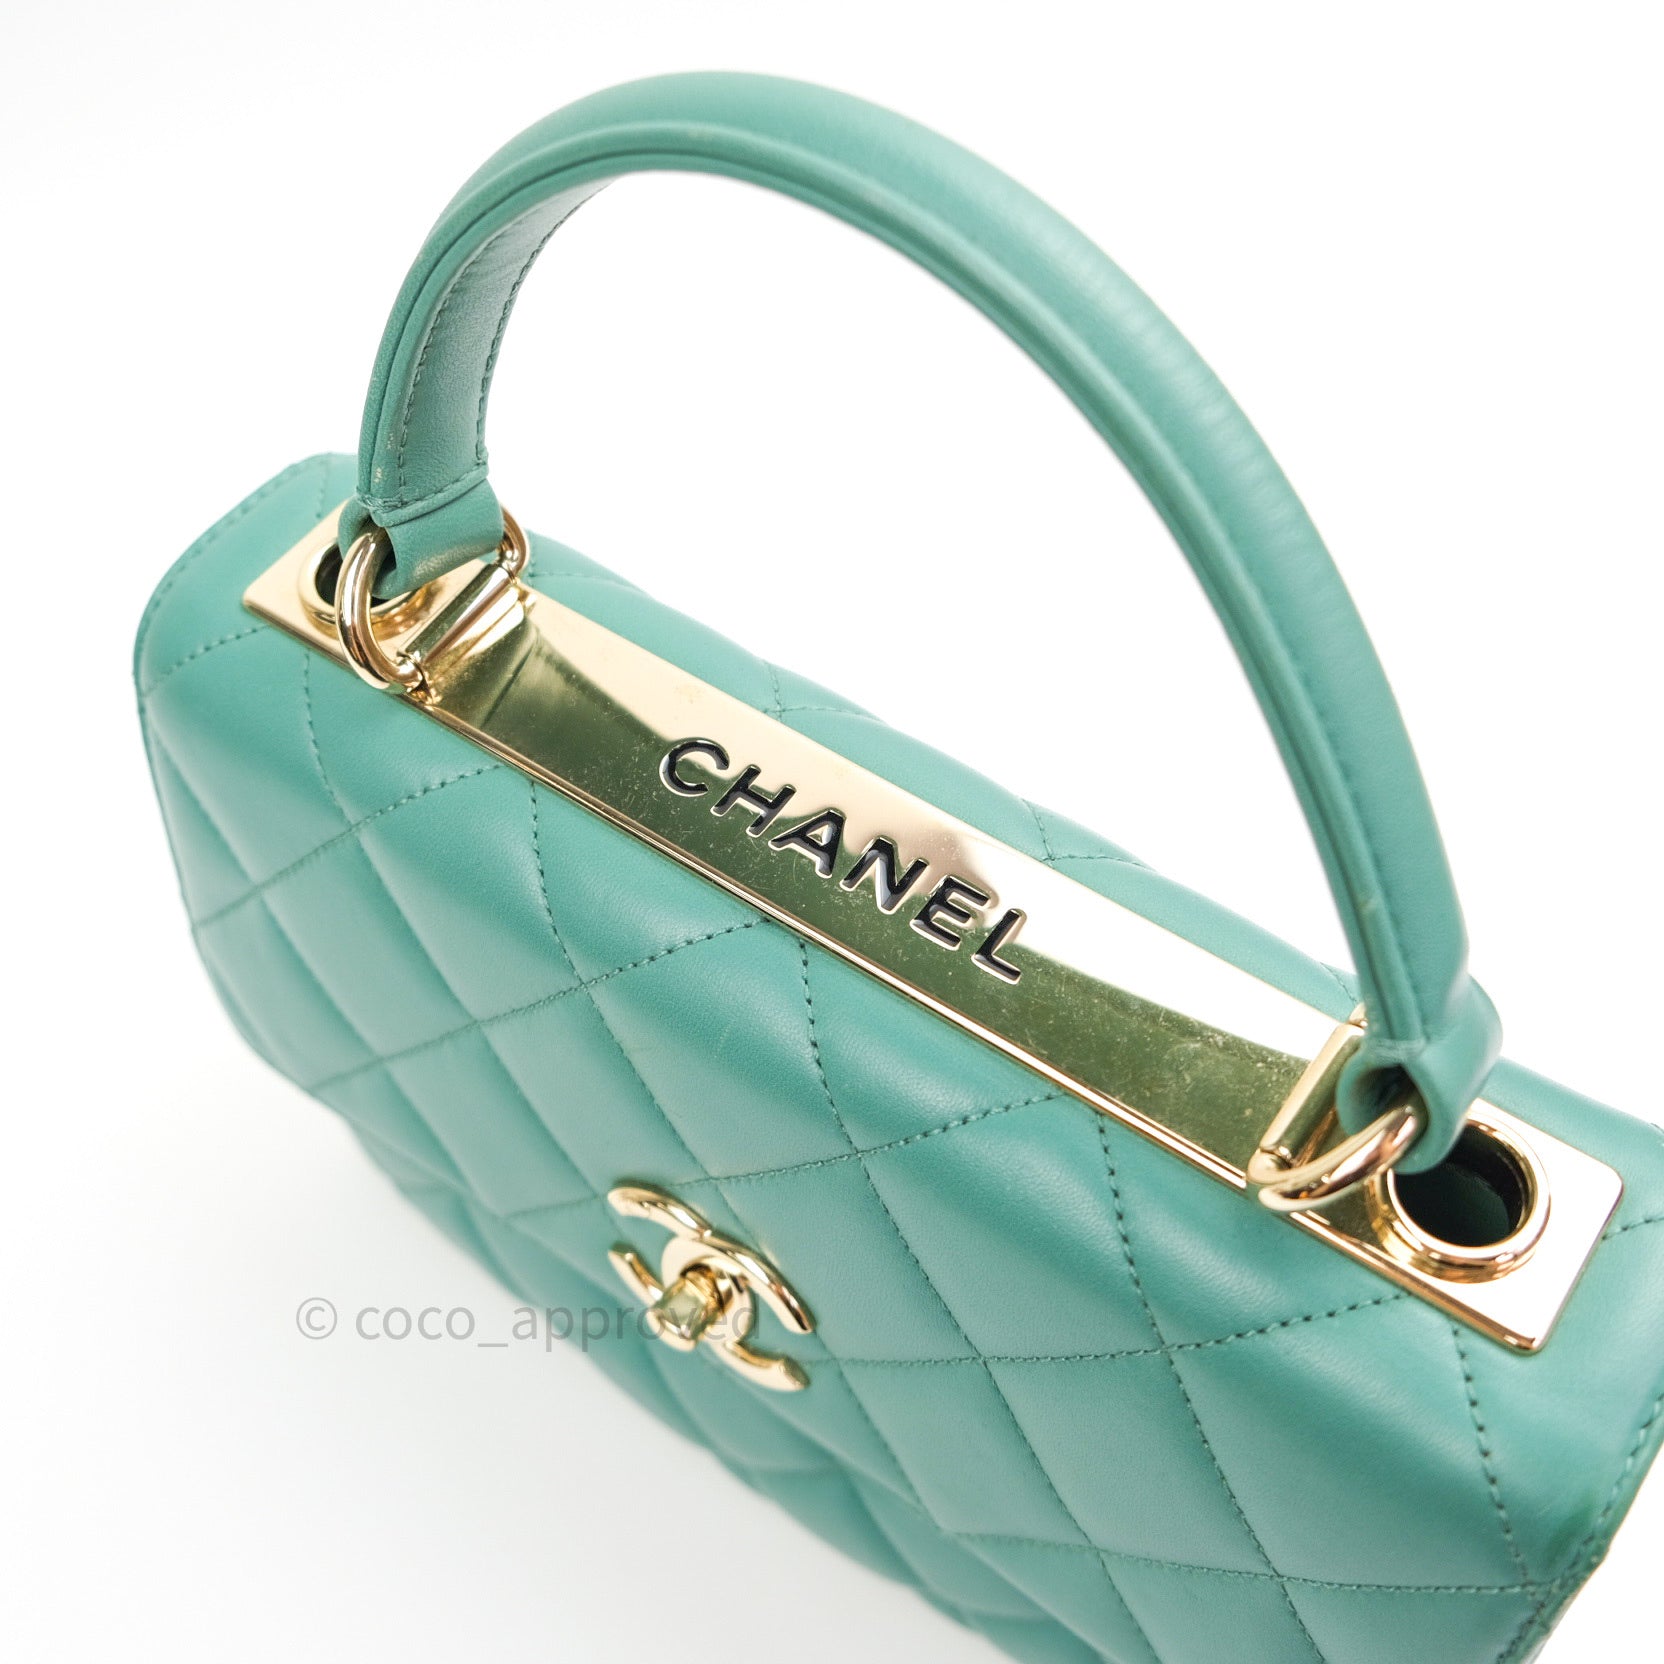 Trendy cc top handle leather handbag Chanel Green in Leather